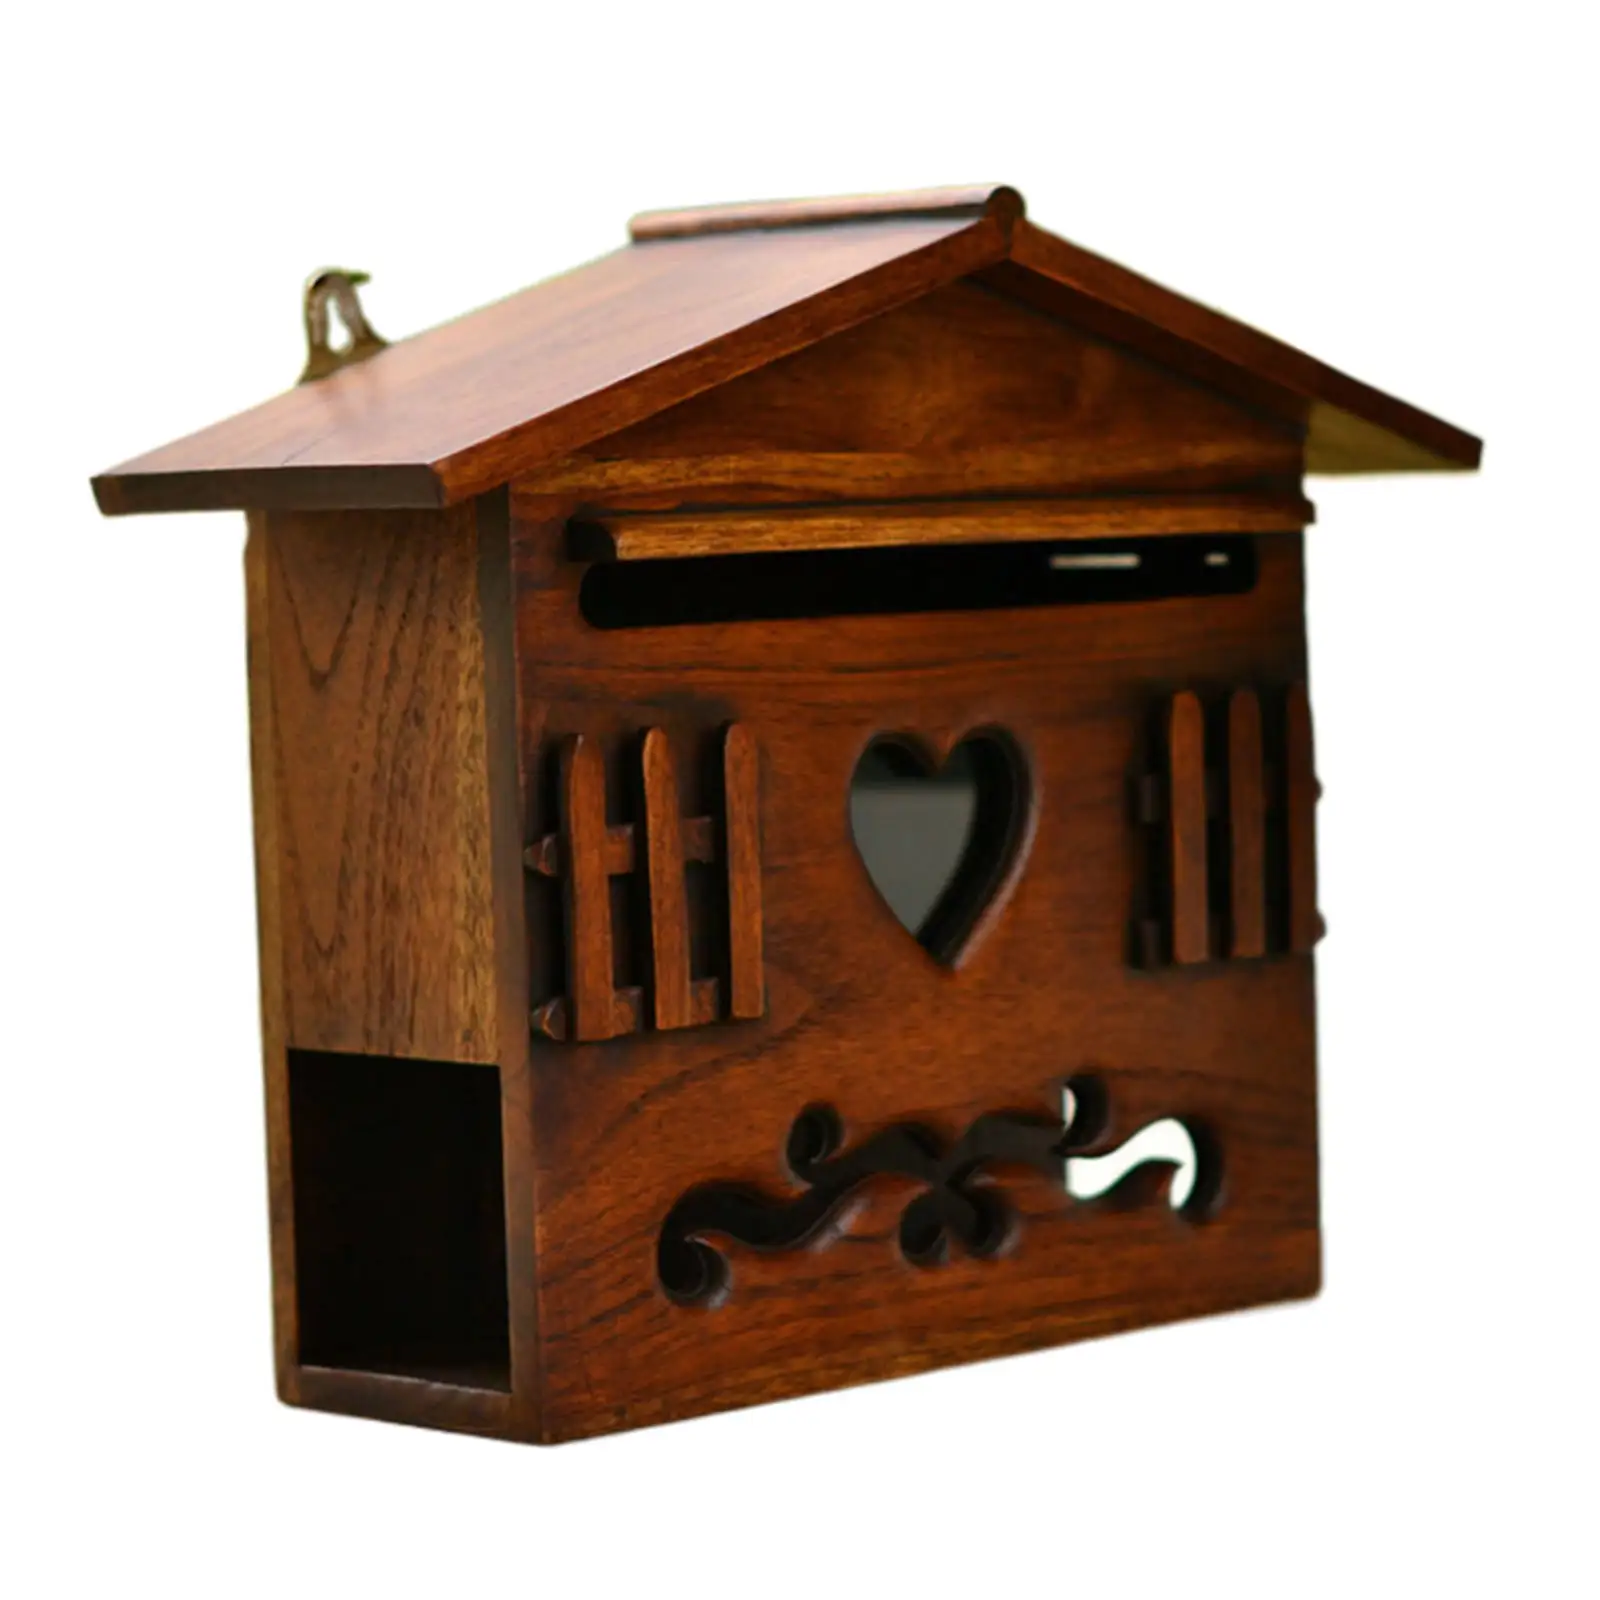 Locking Mailbox Rural Holds Documents Bills Letters Keys Mail Organizer for Home Office Hallway